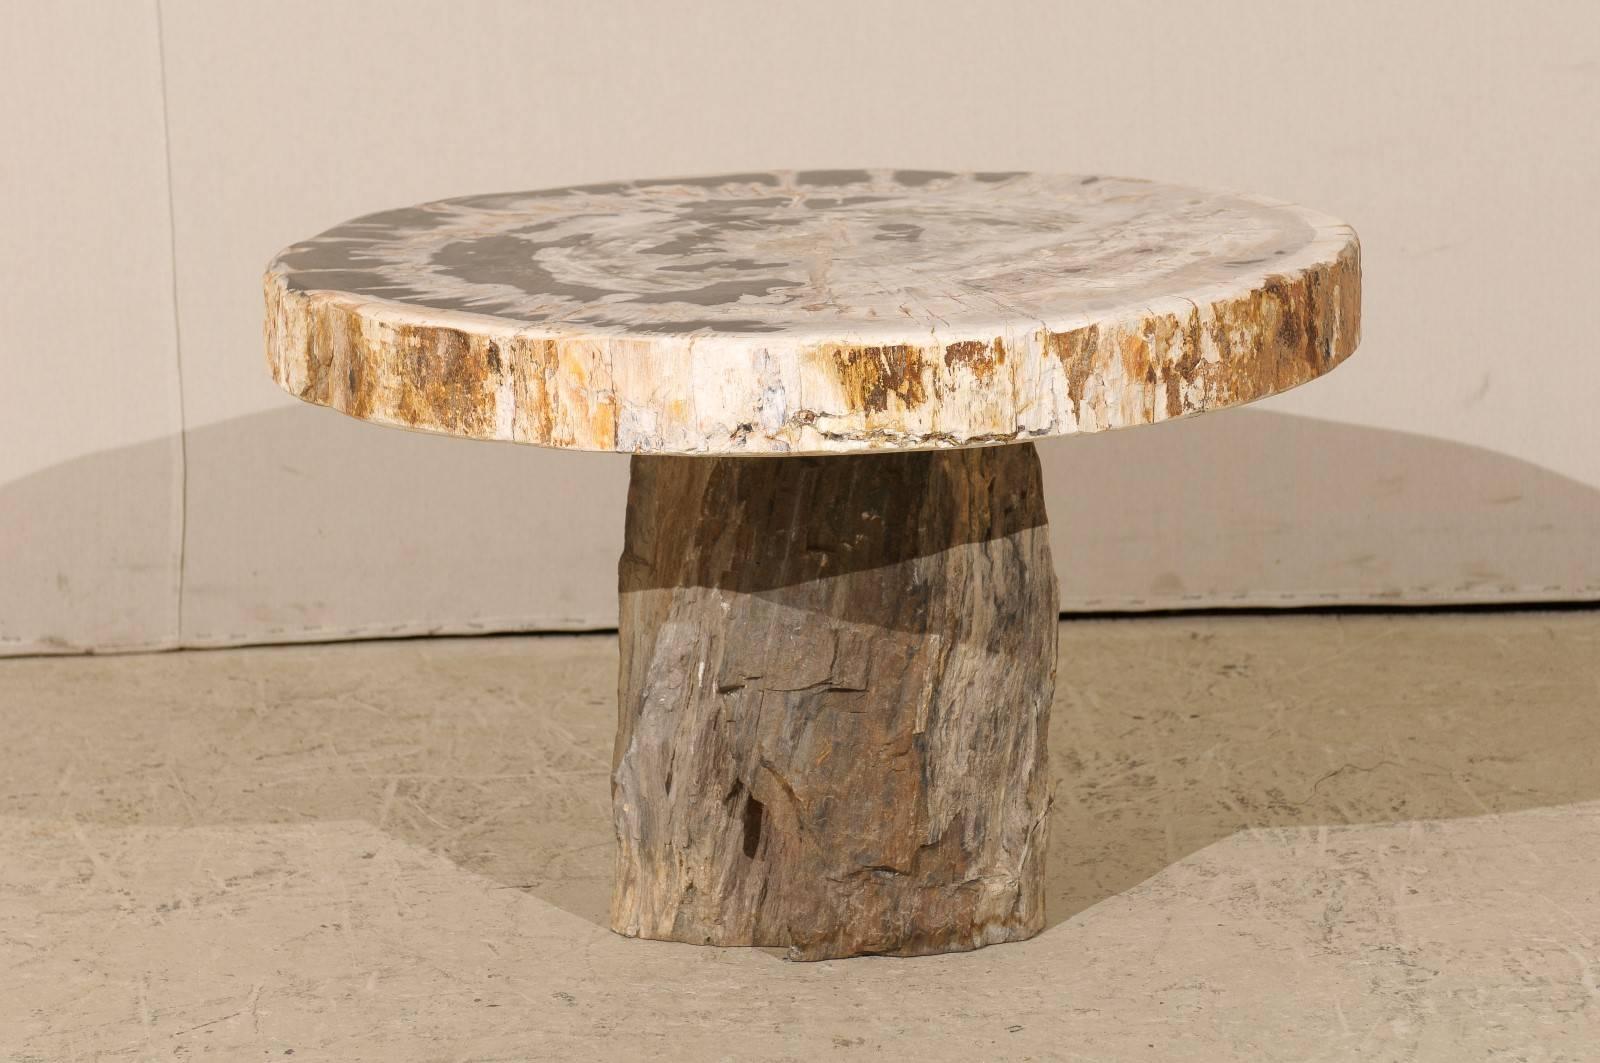 Indonesian A Live-Edge Petrified Wood Pedestal Coffee Table w/Mostly Round-Shaped Top For Sale